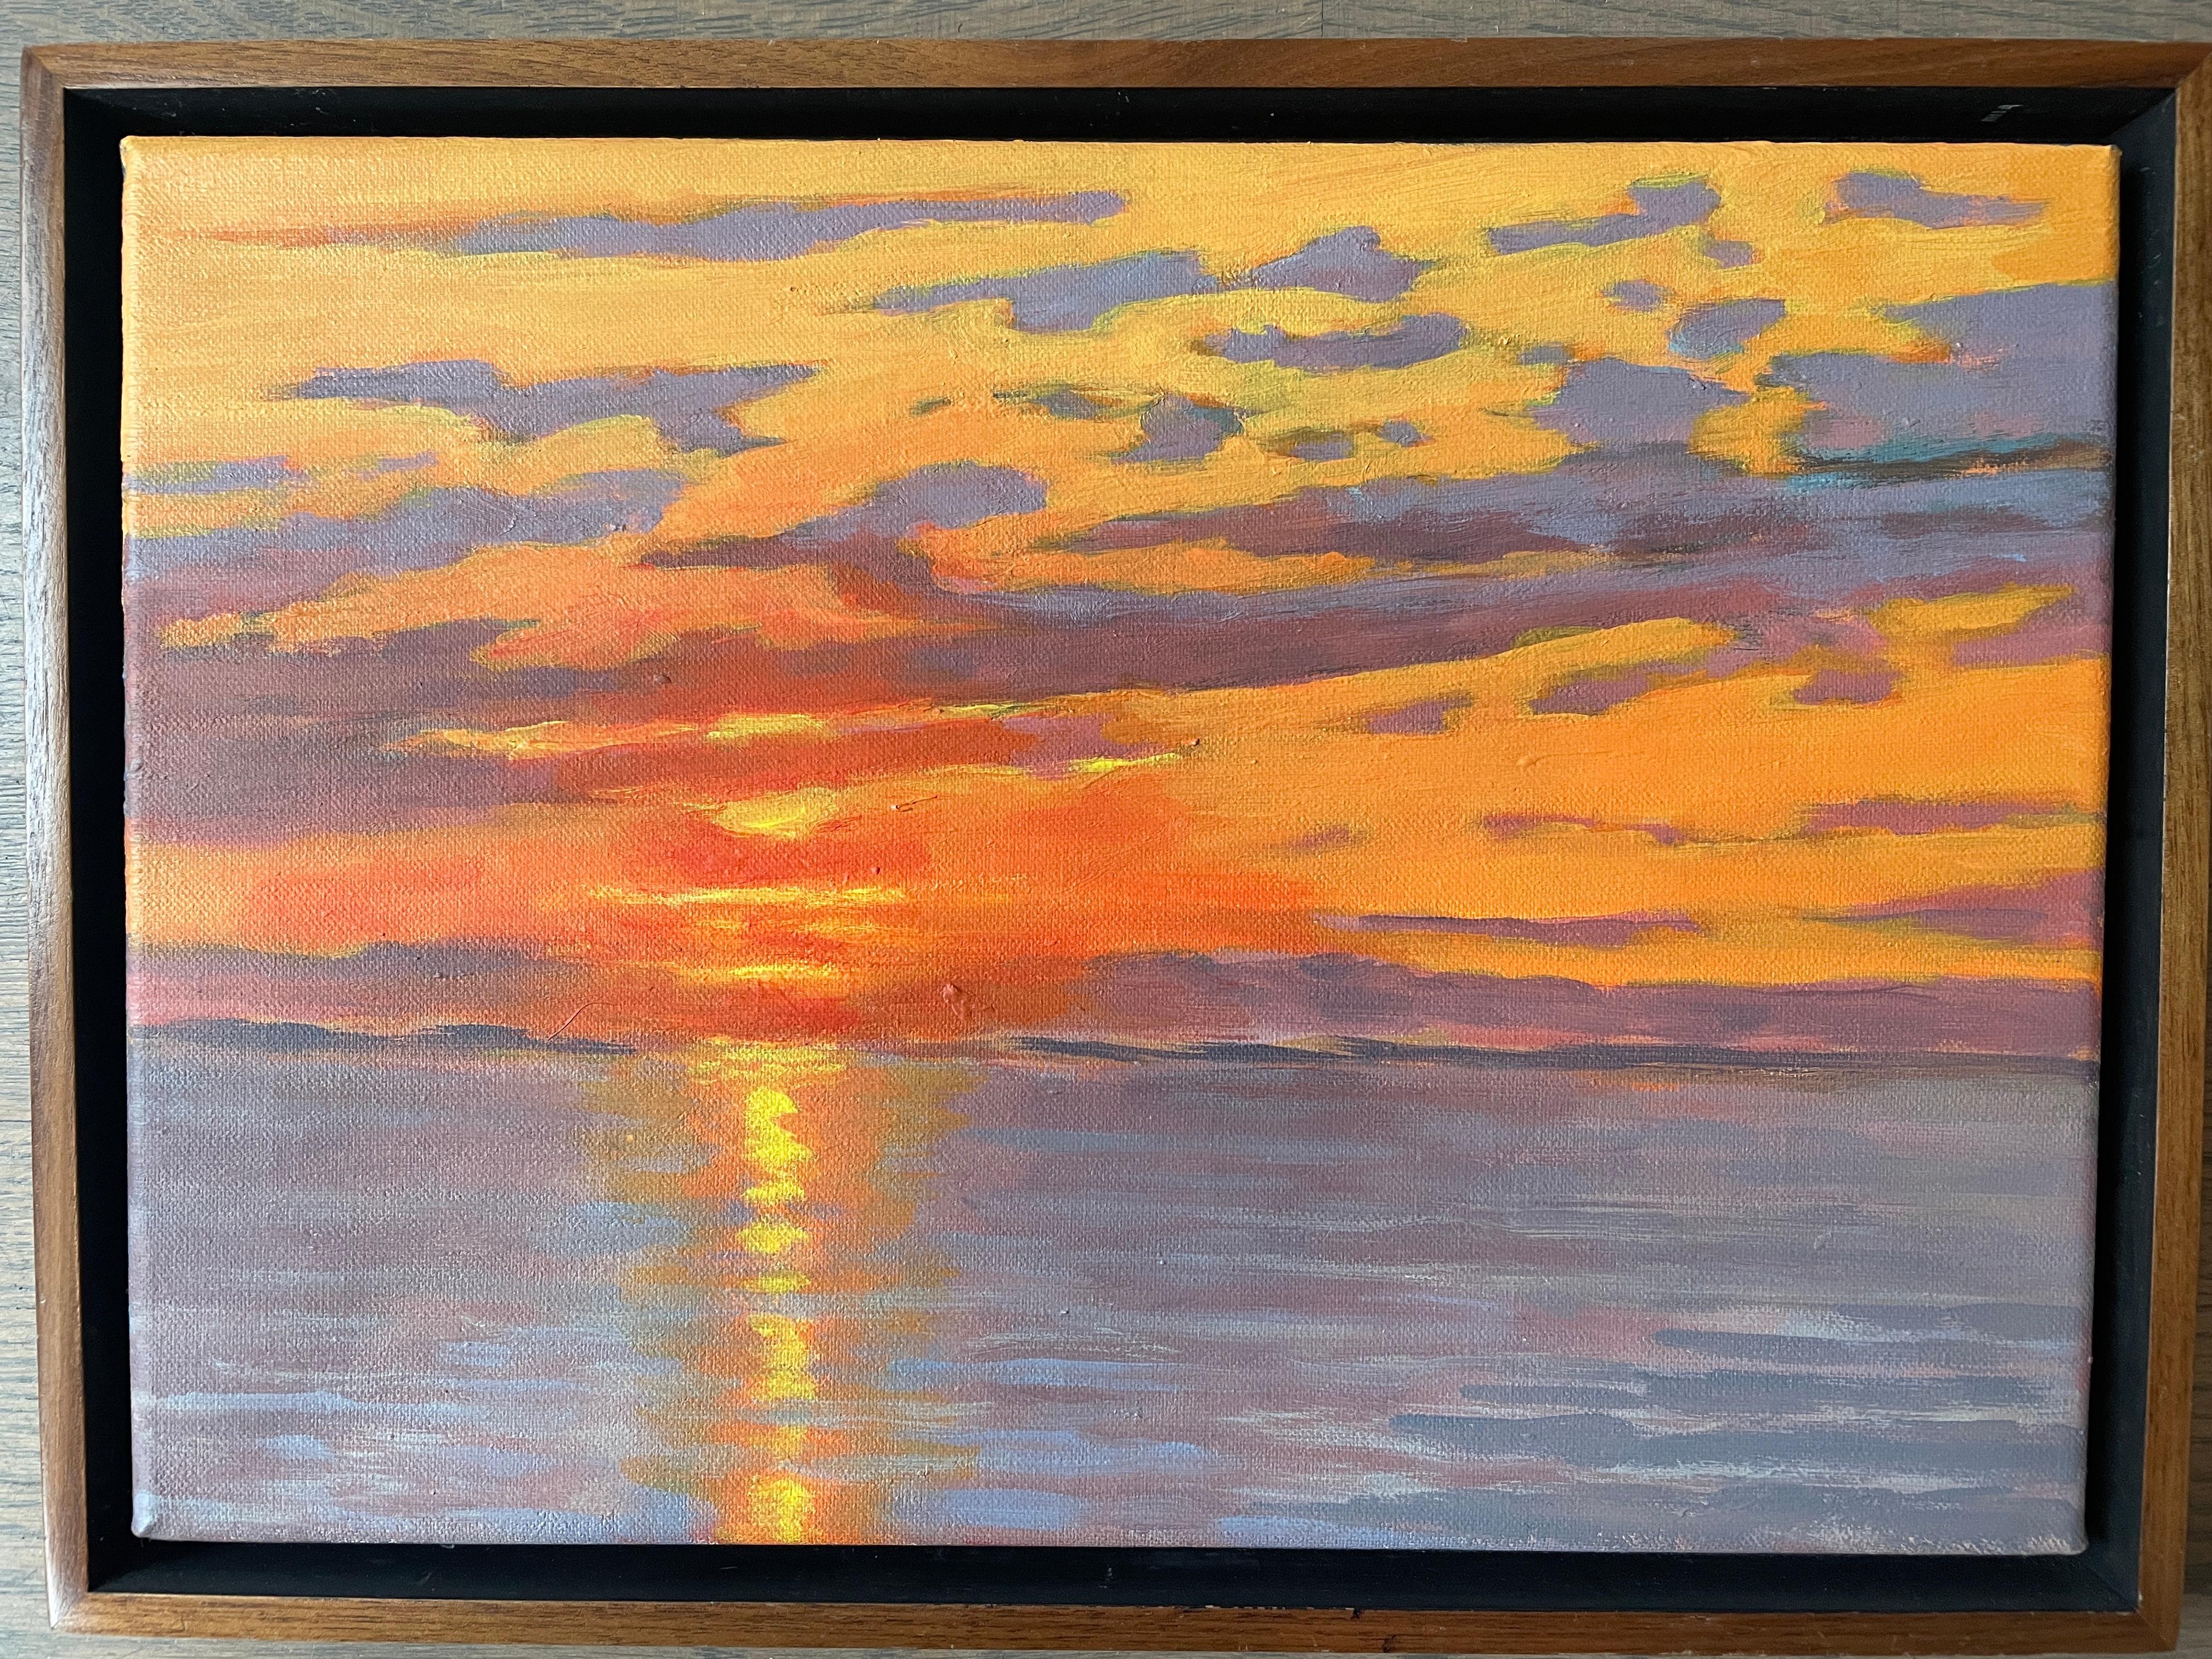 Impressionistic Rendering of a Fiery Sunset . Title - Impressionist Sunset - Painting by Carl Scorza